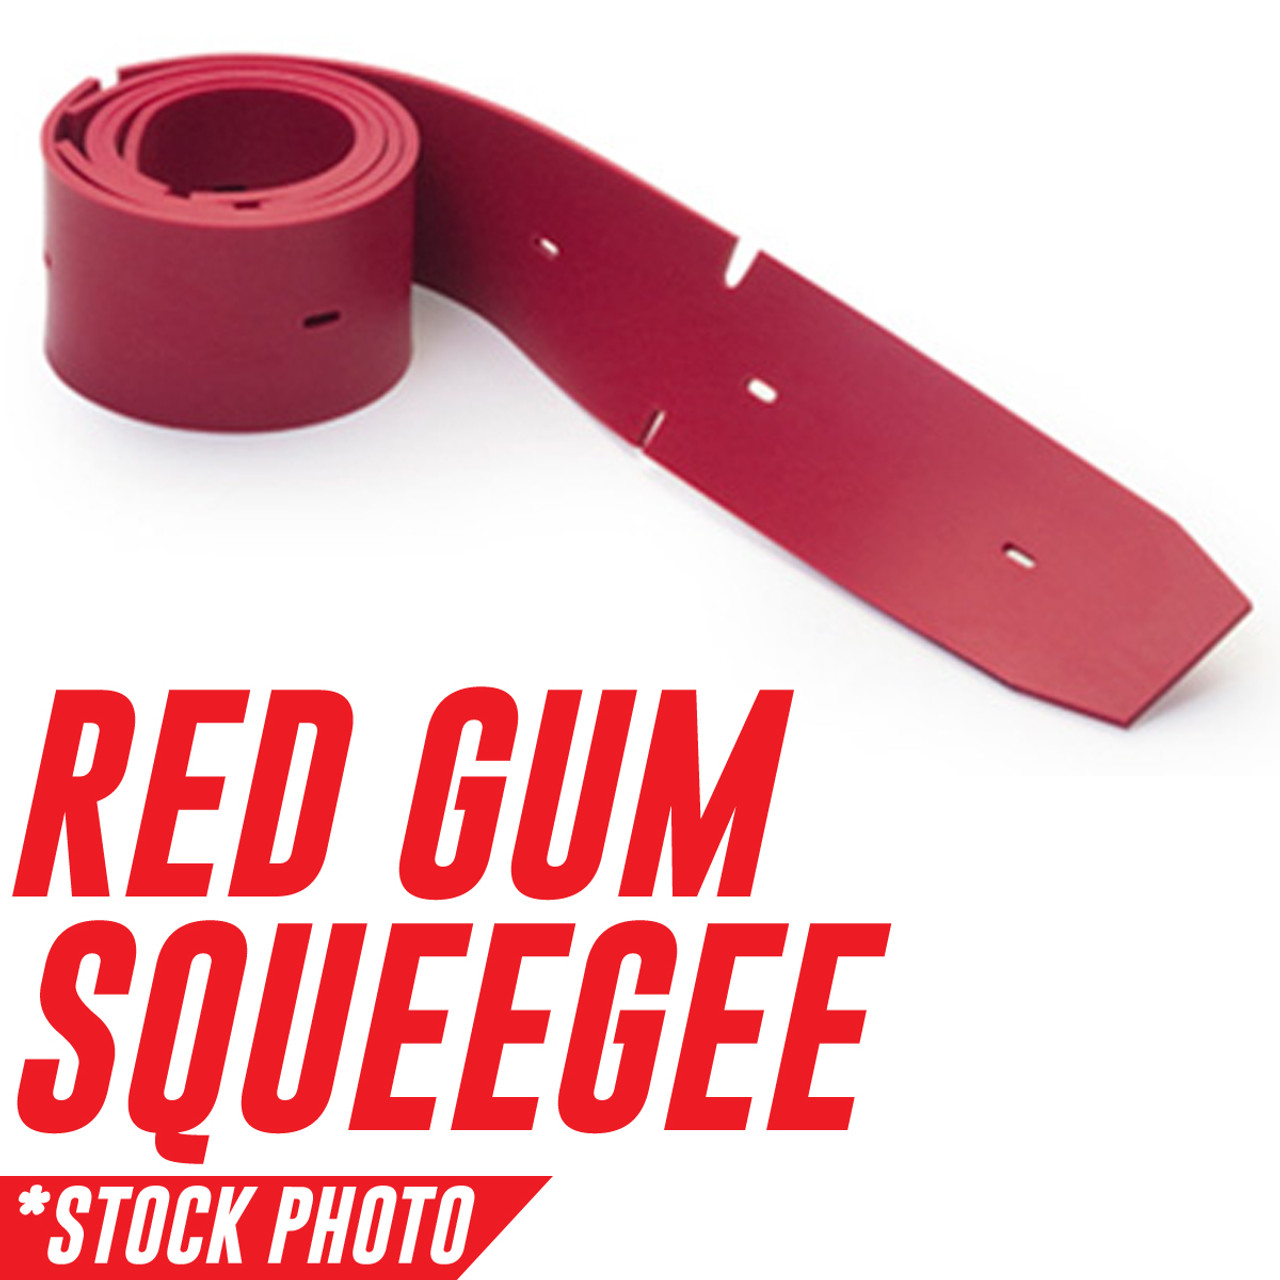 1200383: Squeegee, Front, Red Gum fits Tennant Models T12